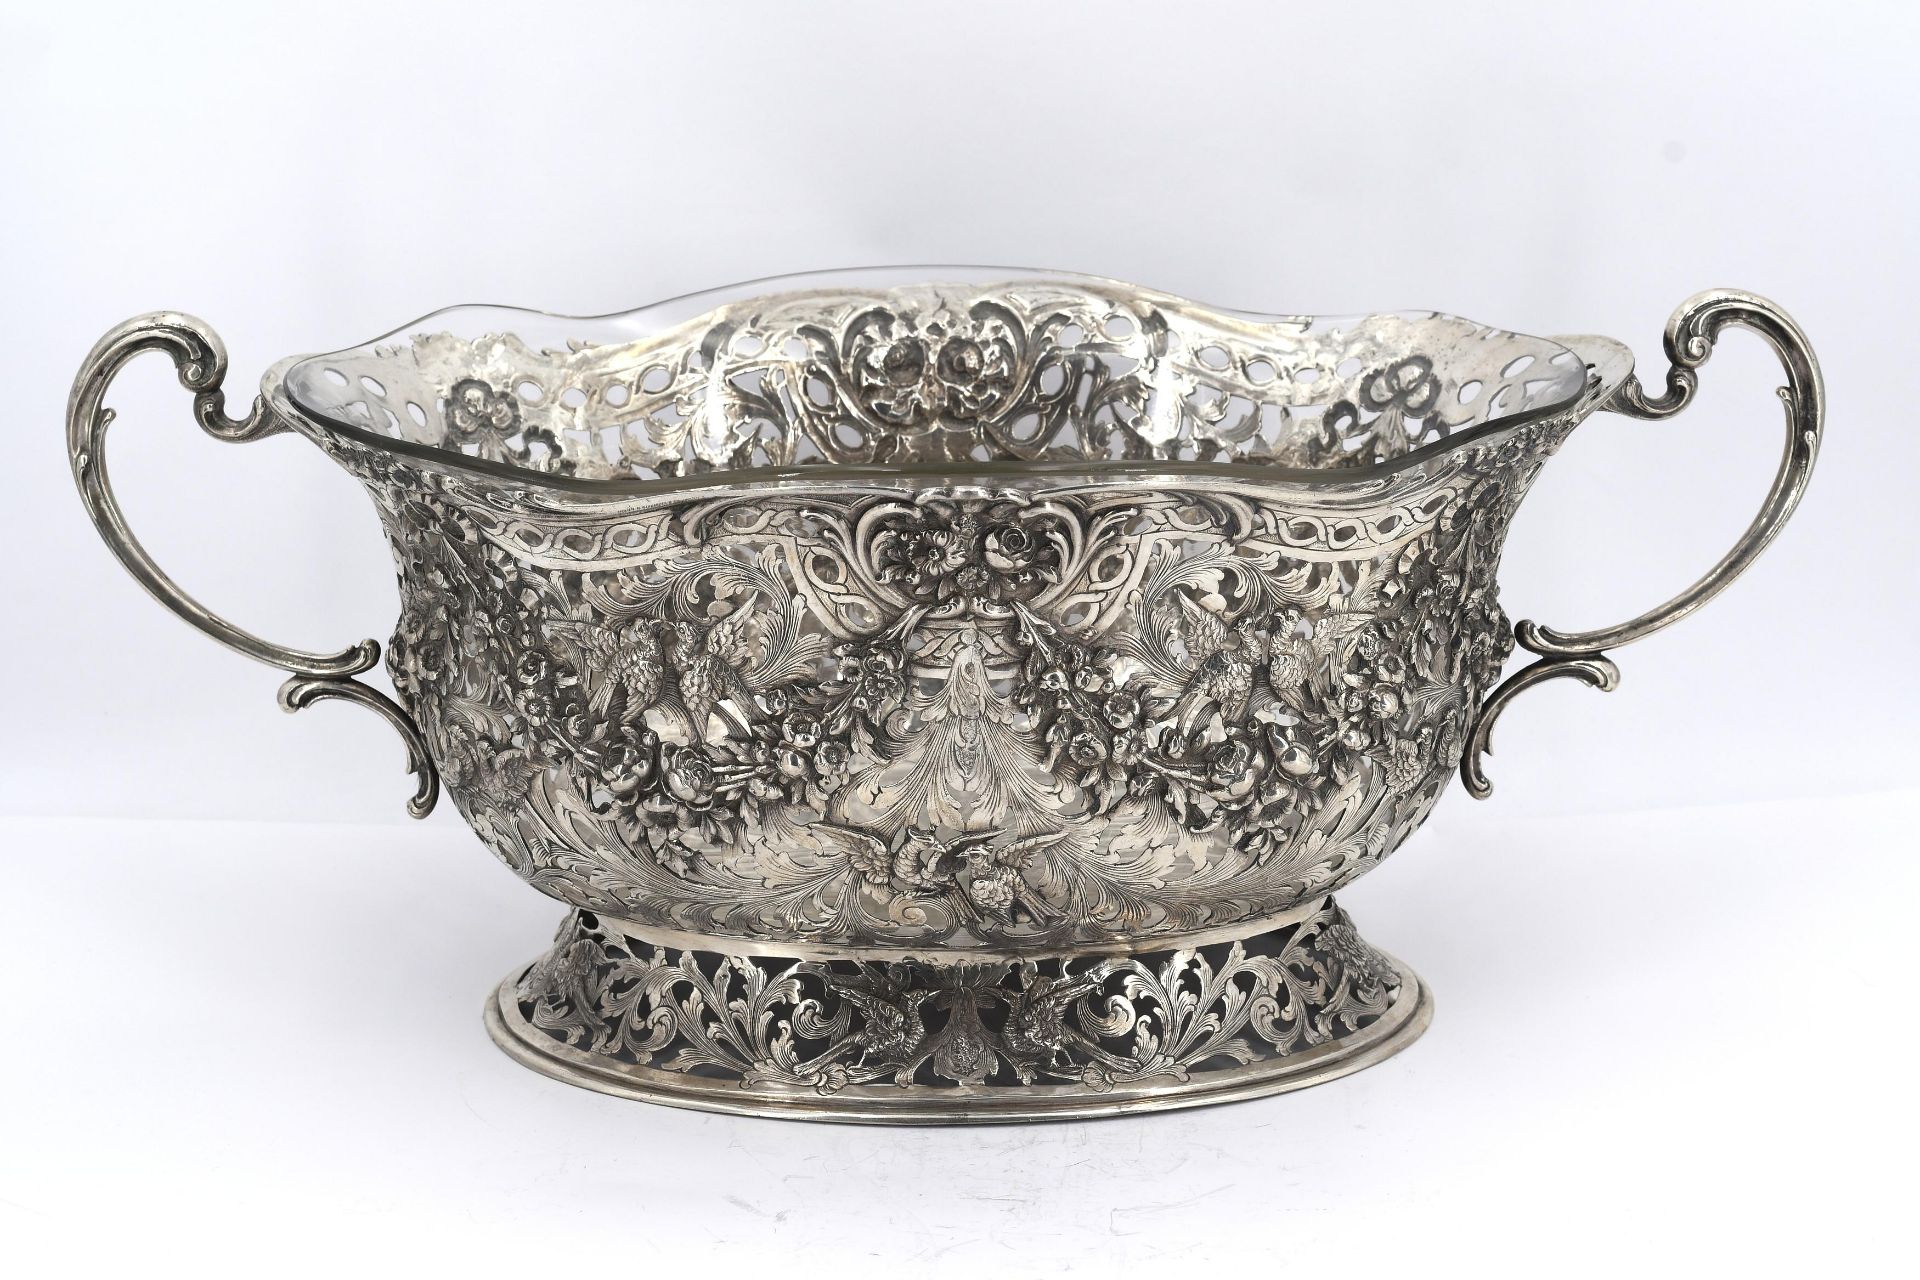 Pair of magnificent large silver bowls with garlands and birds of paradise - Image 13 of 21